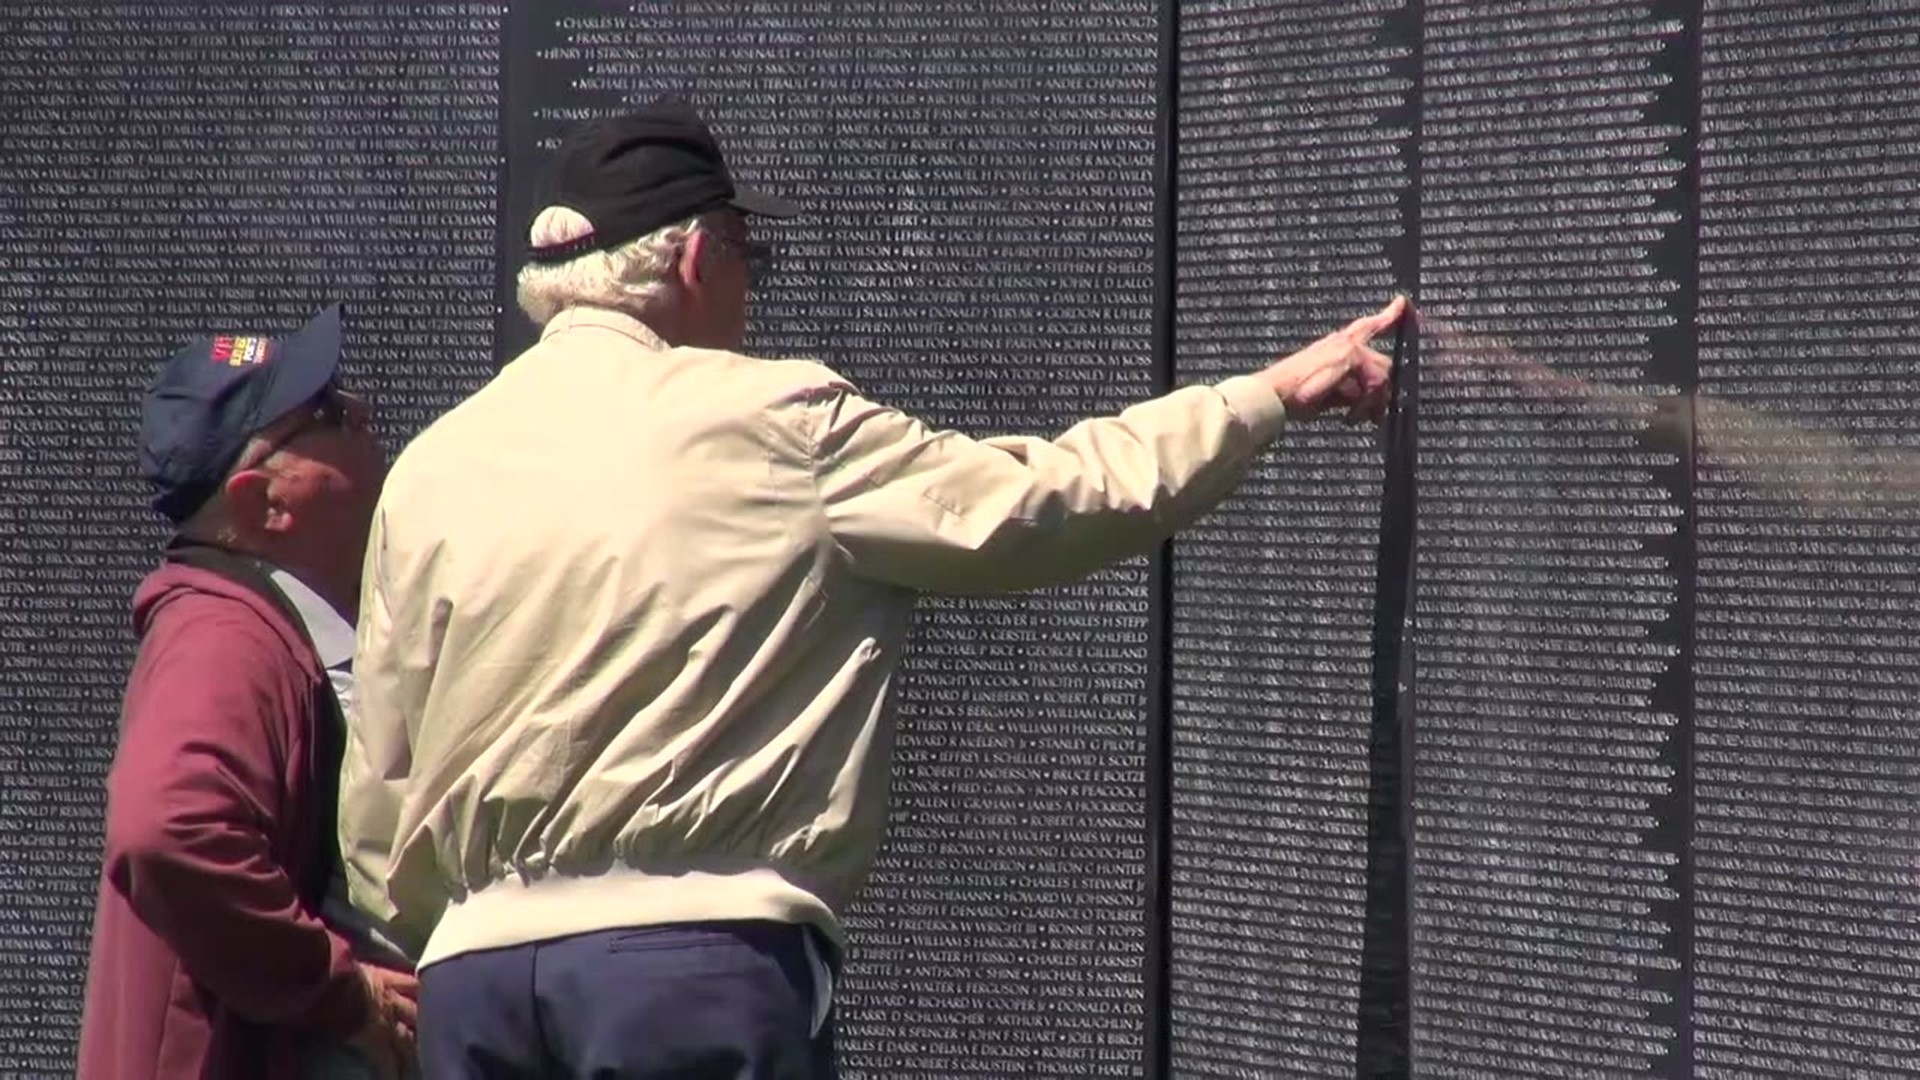 The wall is open to the public, and a memorial service is held each night at 6 p.m. while the wall is on display until Sunday.